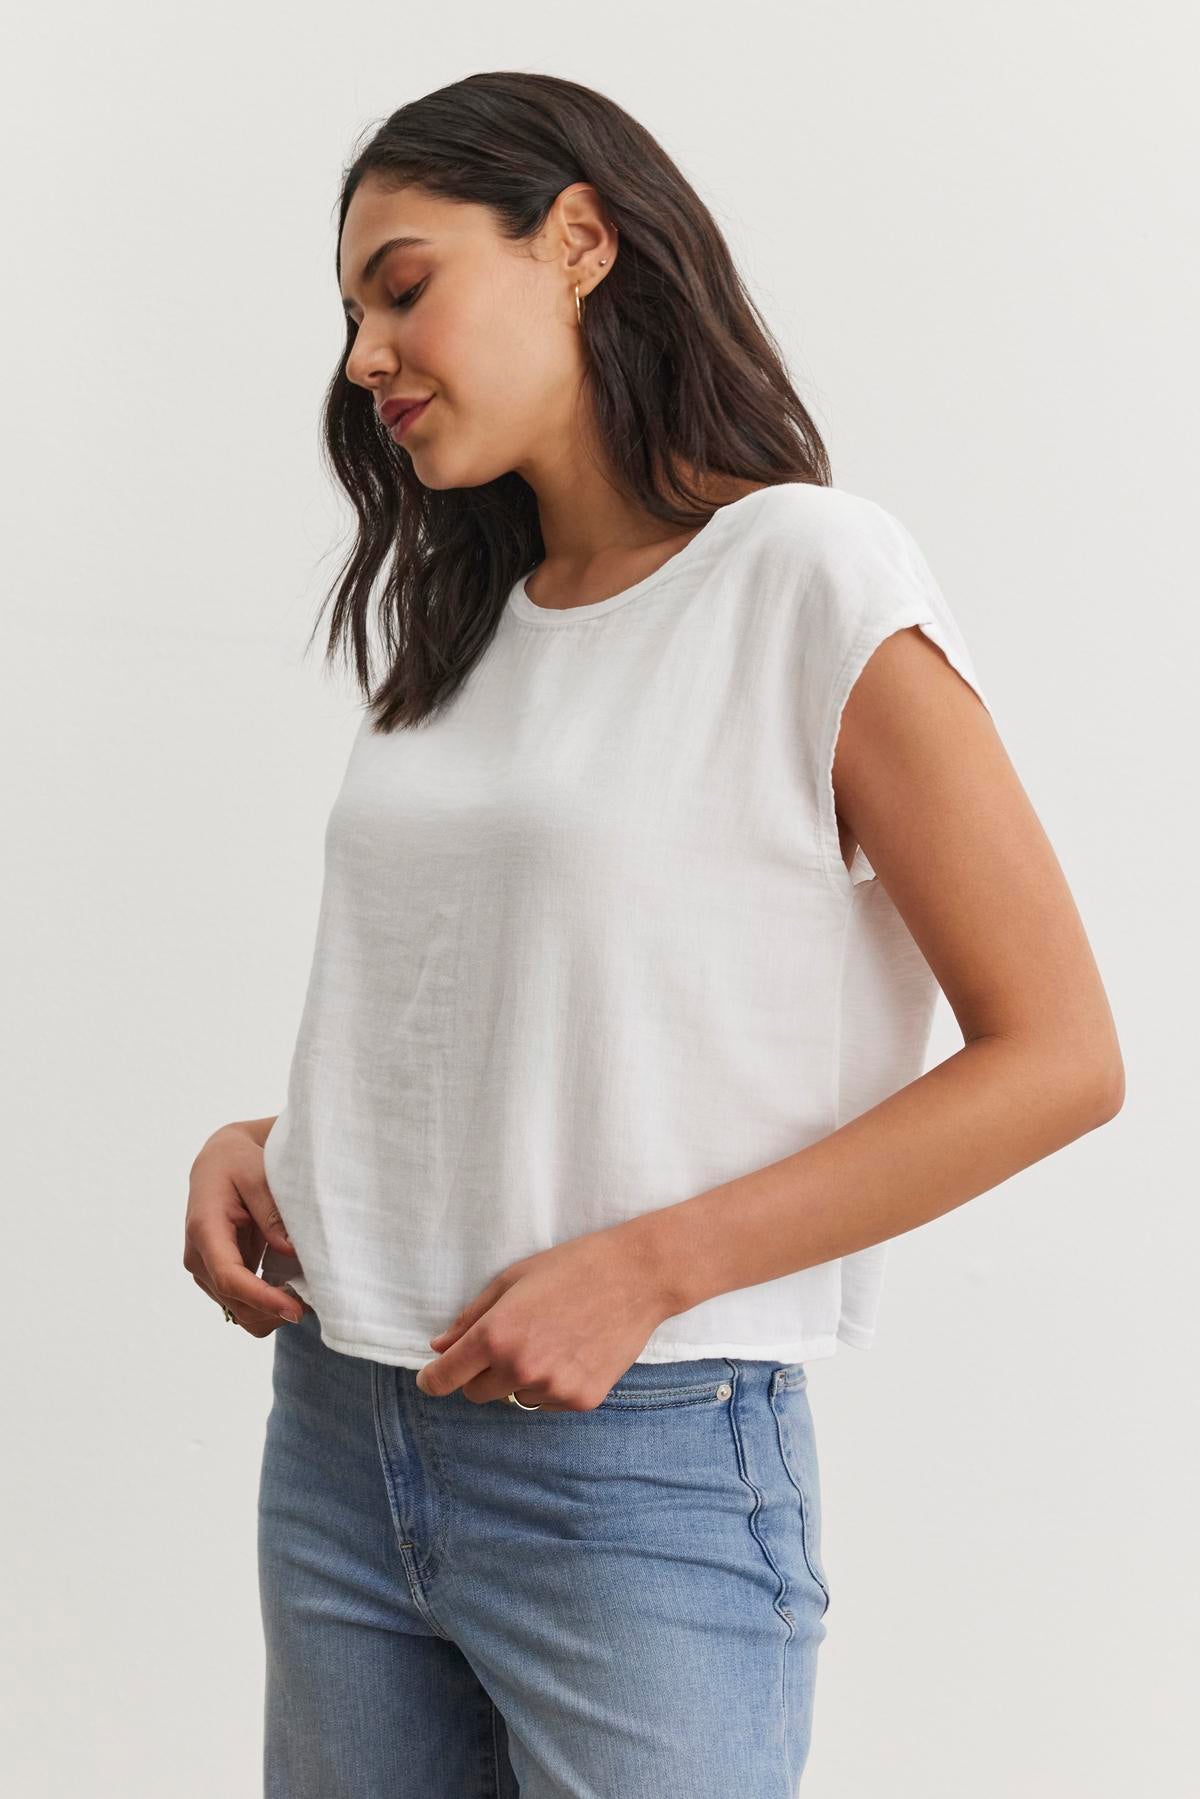 A woman with long dark hair wearing a white DANIELLA CREW NECK TEE by Velvet by Graham & Spencer and blue jeans, showcasing a casual basic look, stands against a plain, light-colored background. The lightweight cotton woven fabric of her cropped silhouette shirt complements her style effortlessly.-37074420924609